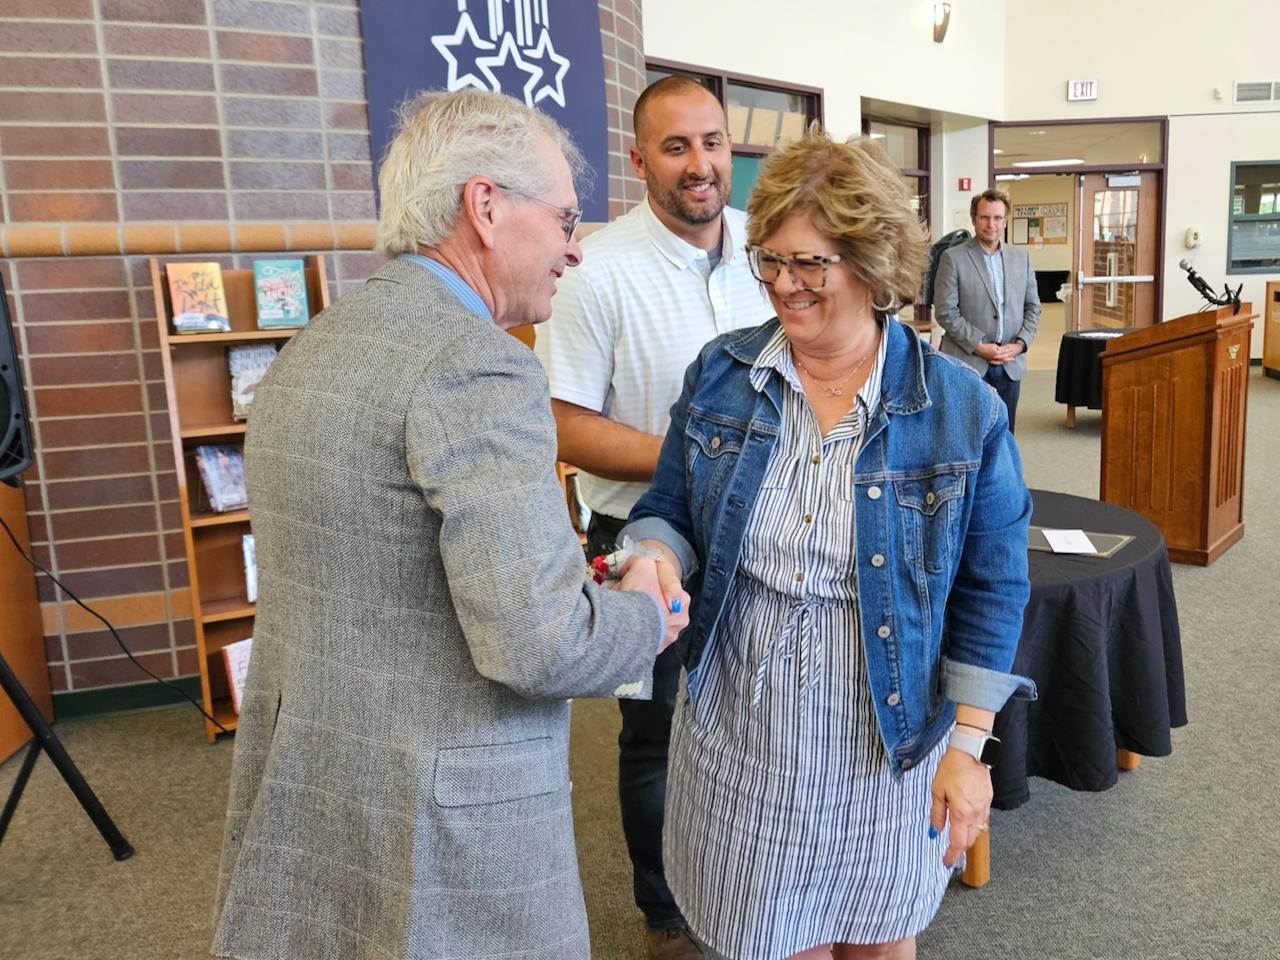 Fort School District holds reception in honor of nine retirees